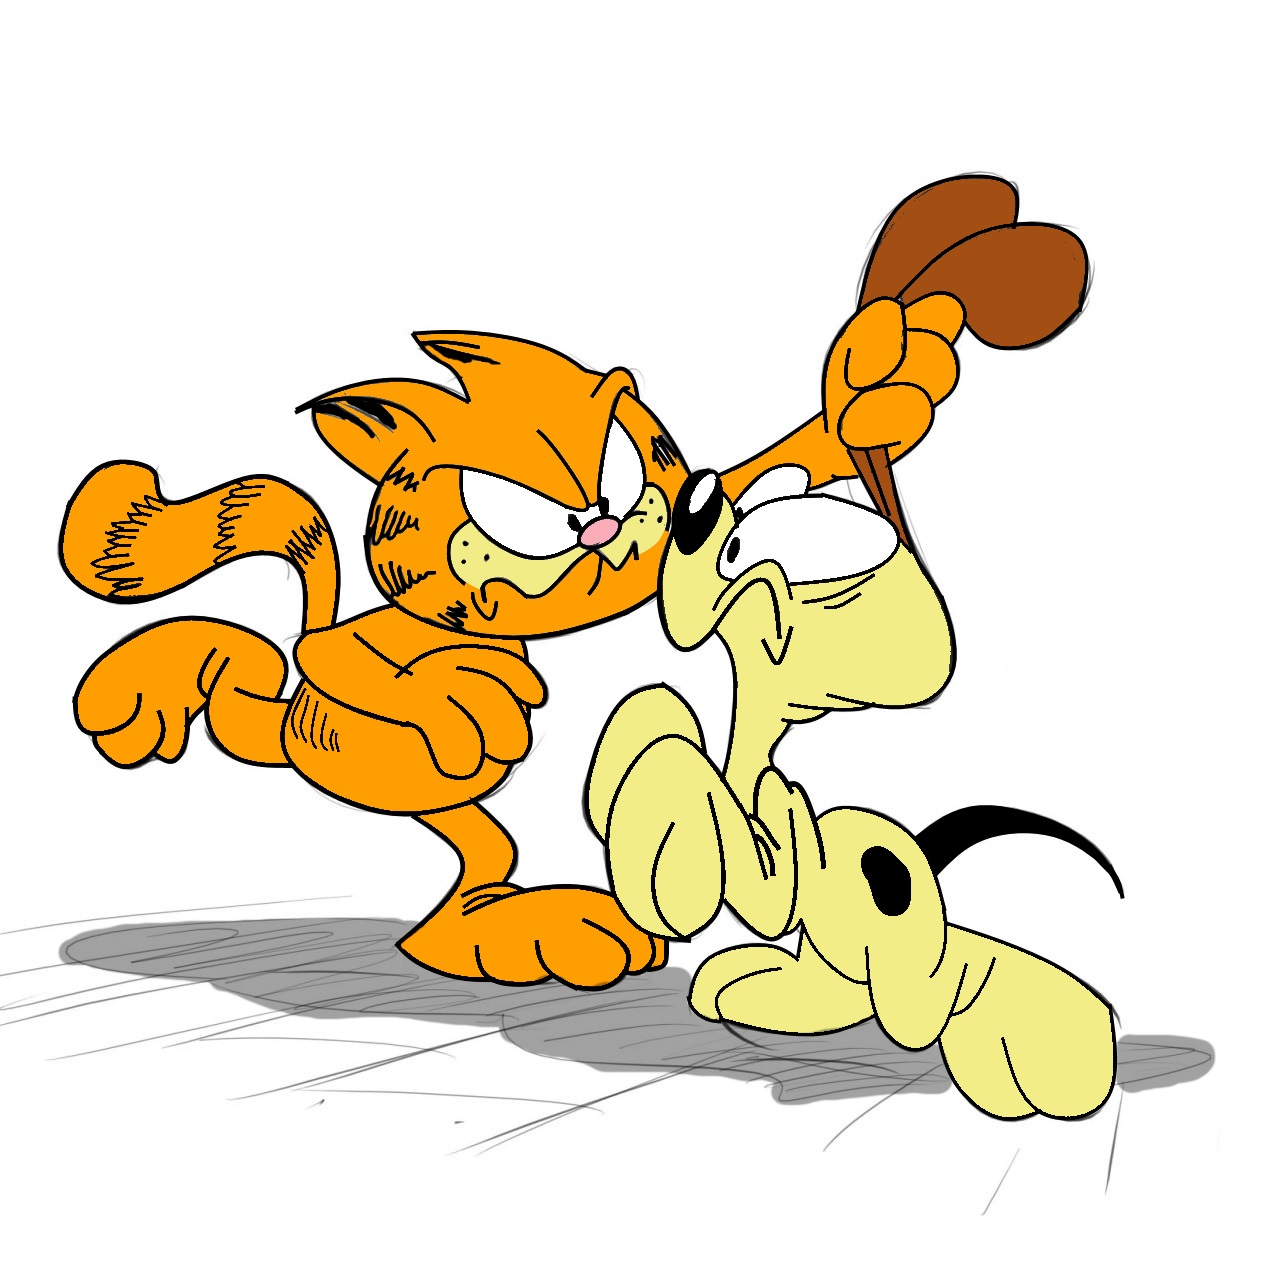 Garfield And Odie By Tardis99 Fur Affinity Dot Net.